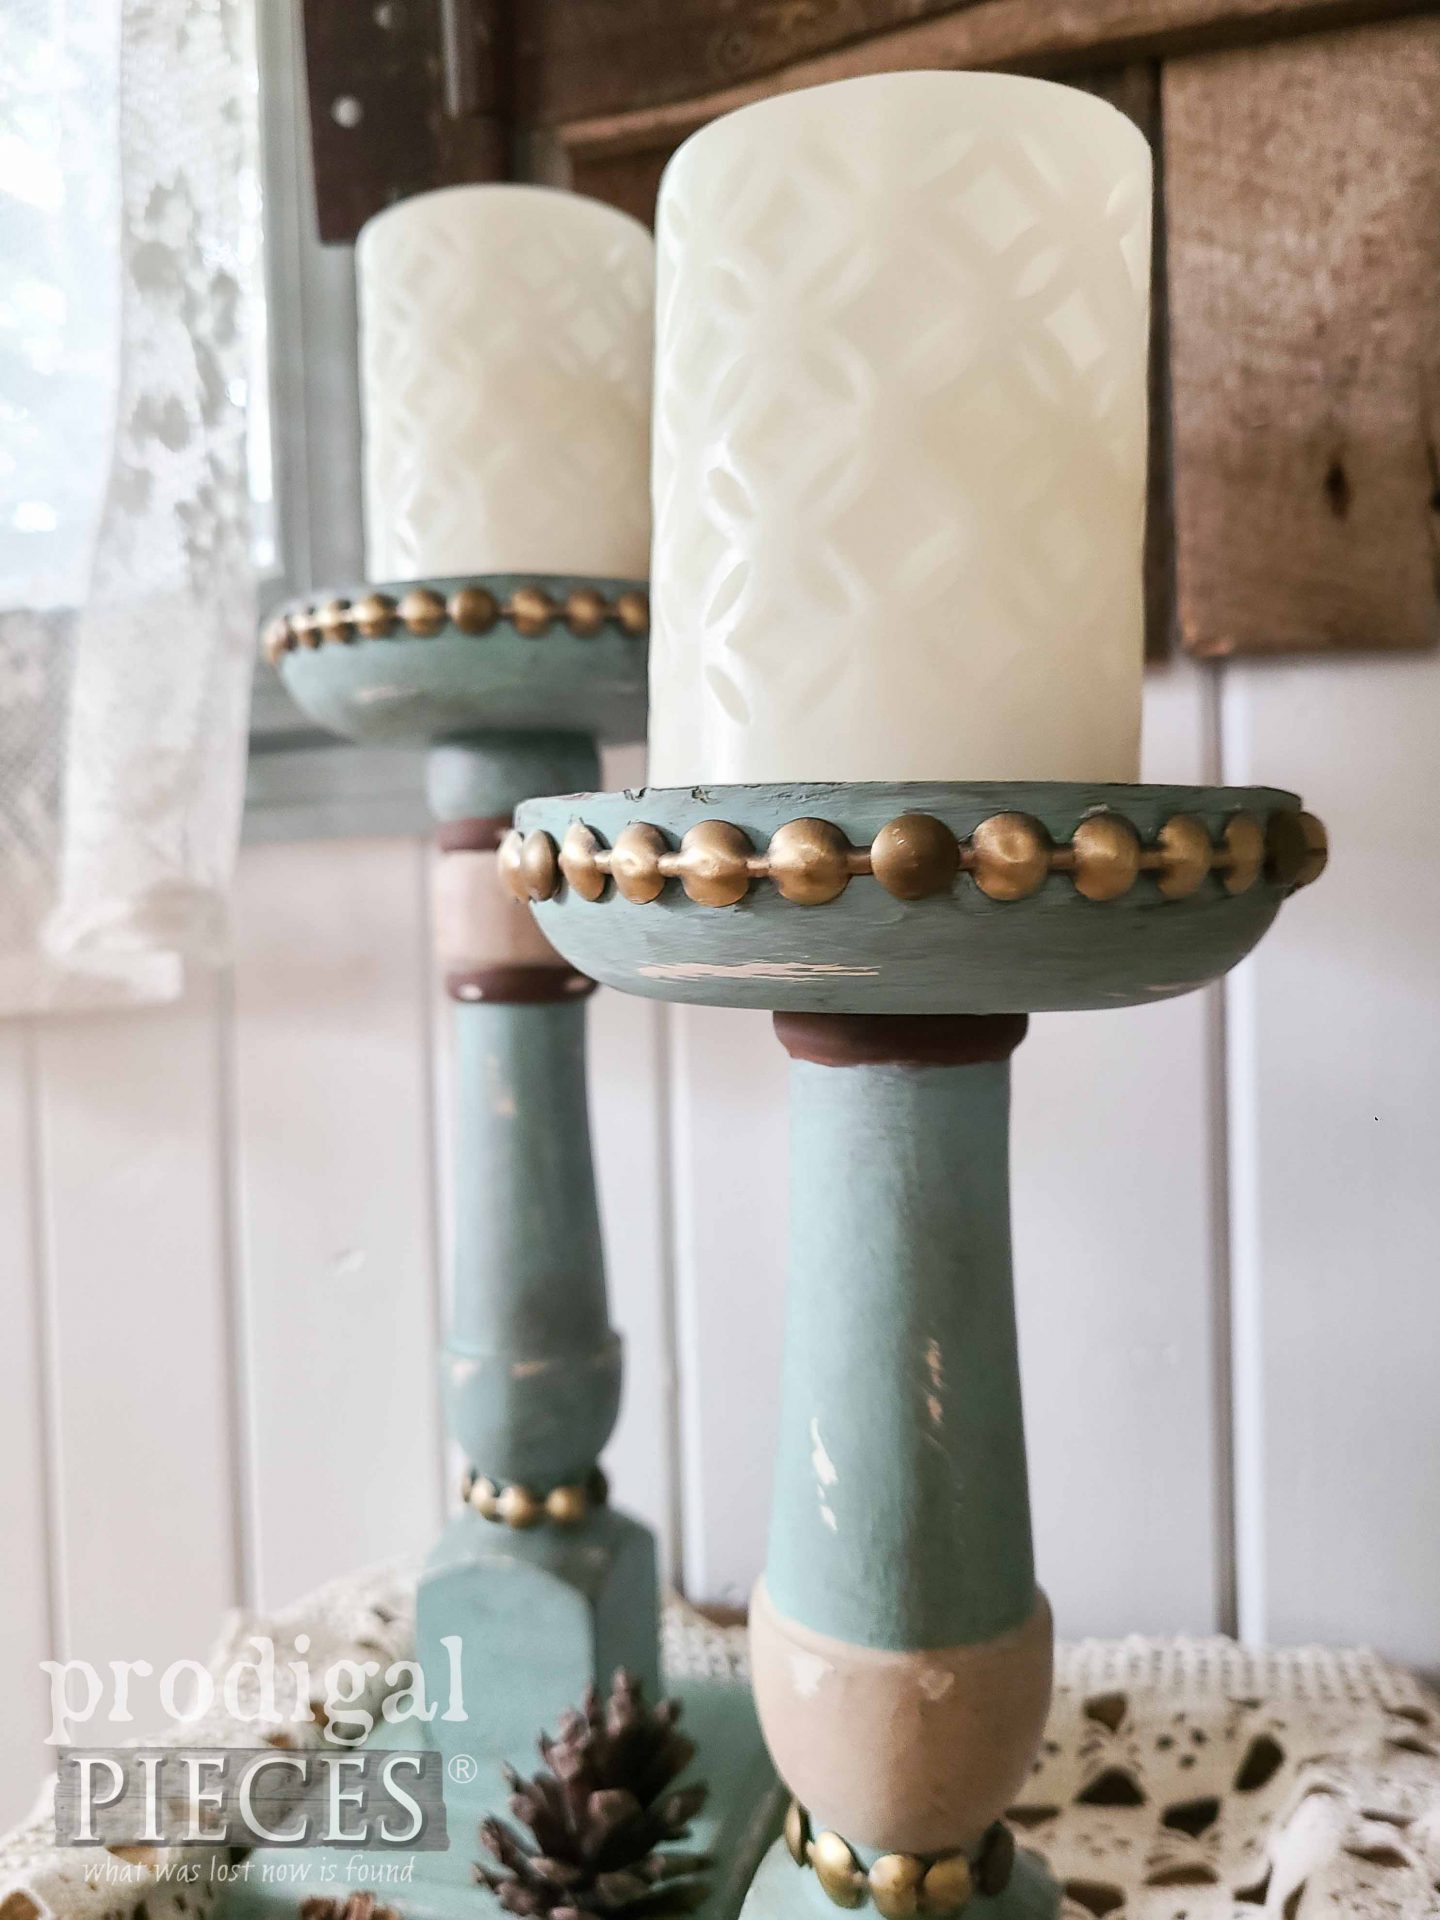 Nailhead Trim on Upcycle Candlestick Makeover by Larissa of Prodigal Pieces | prodigalpieces.com #prodigalpieces #upcycled #diy #farmhouse